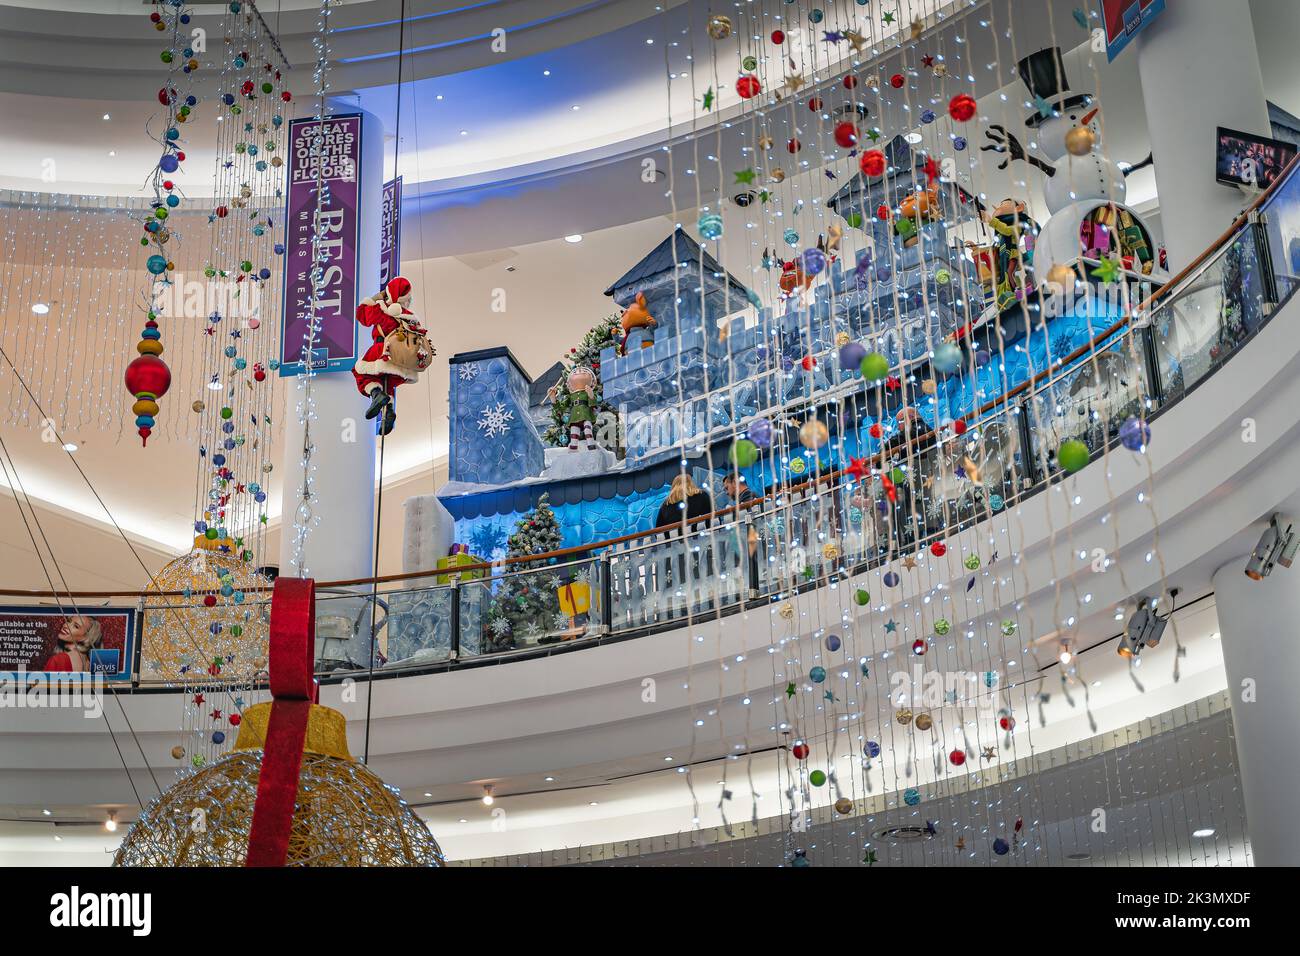 Dublin, November 2019 Santa Claus climbing on a rope, Christmas balls snowman and decorations in Jervis Shopping Centre. Santa grotto or winter castle Stock Photo